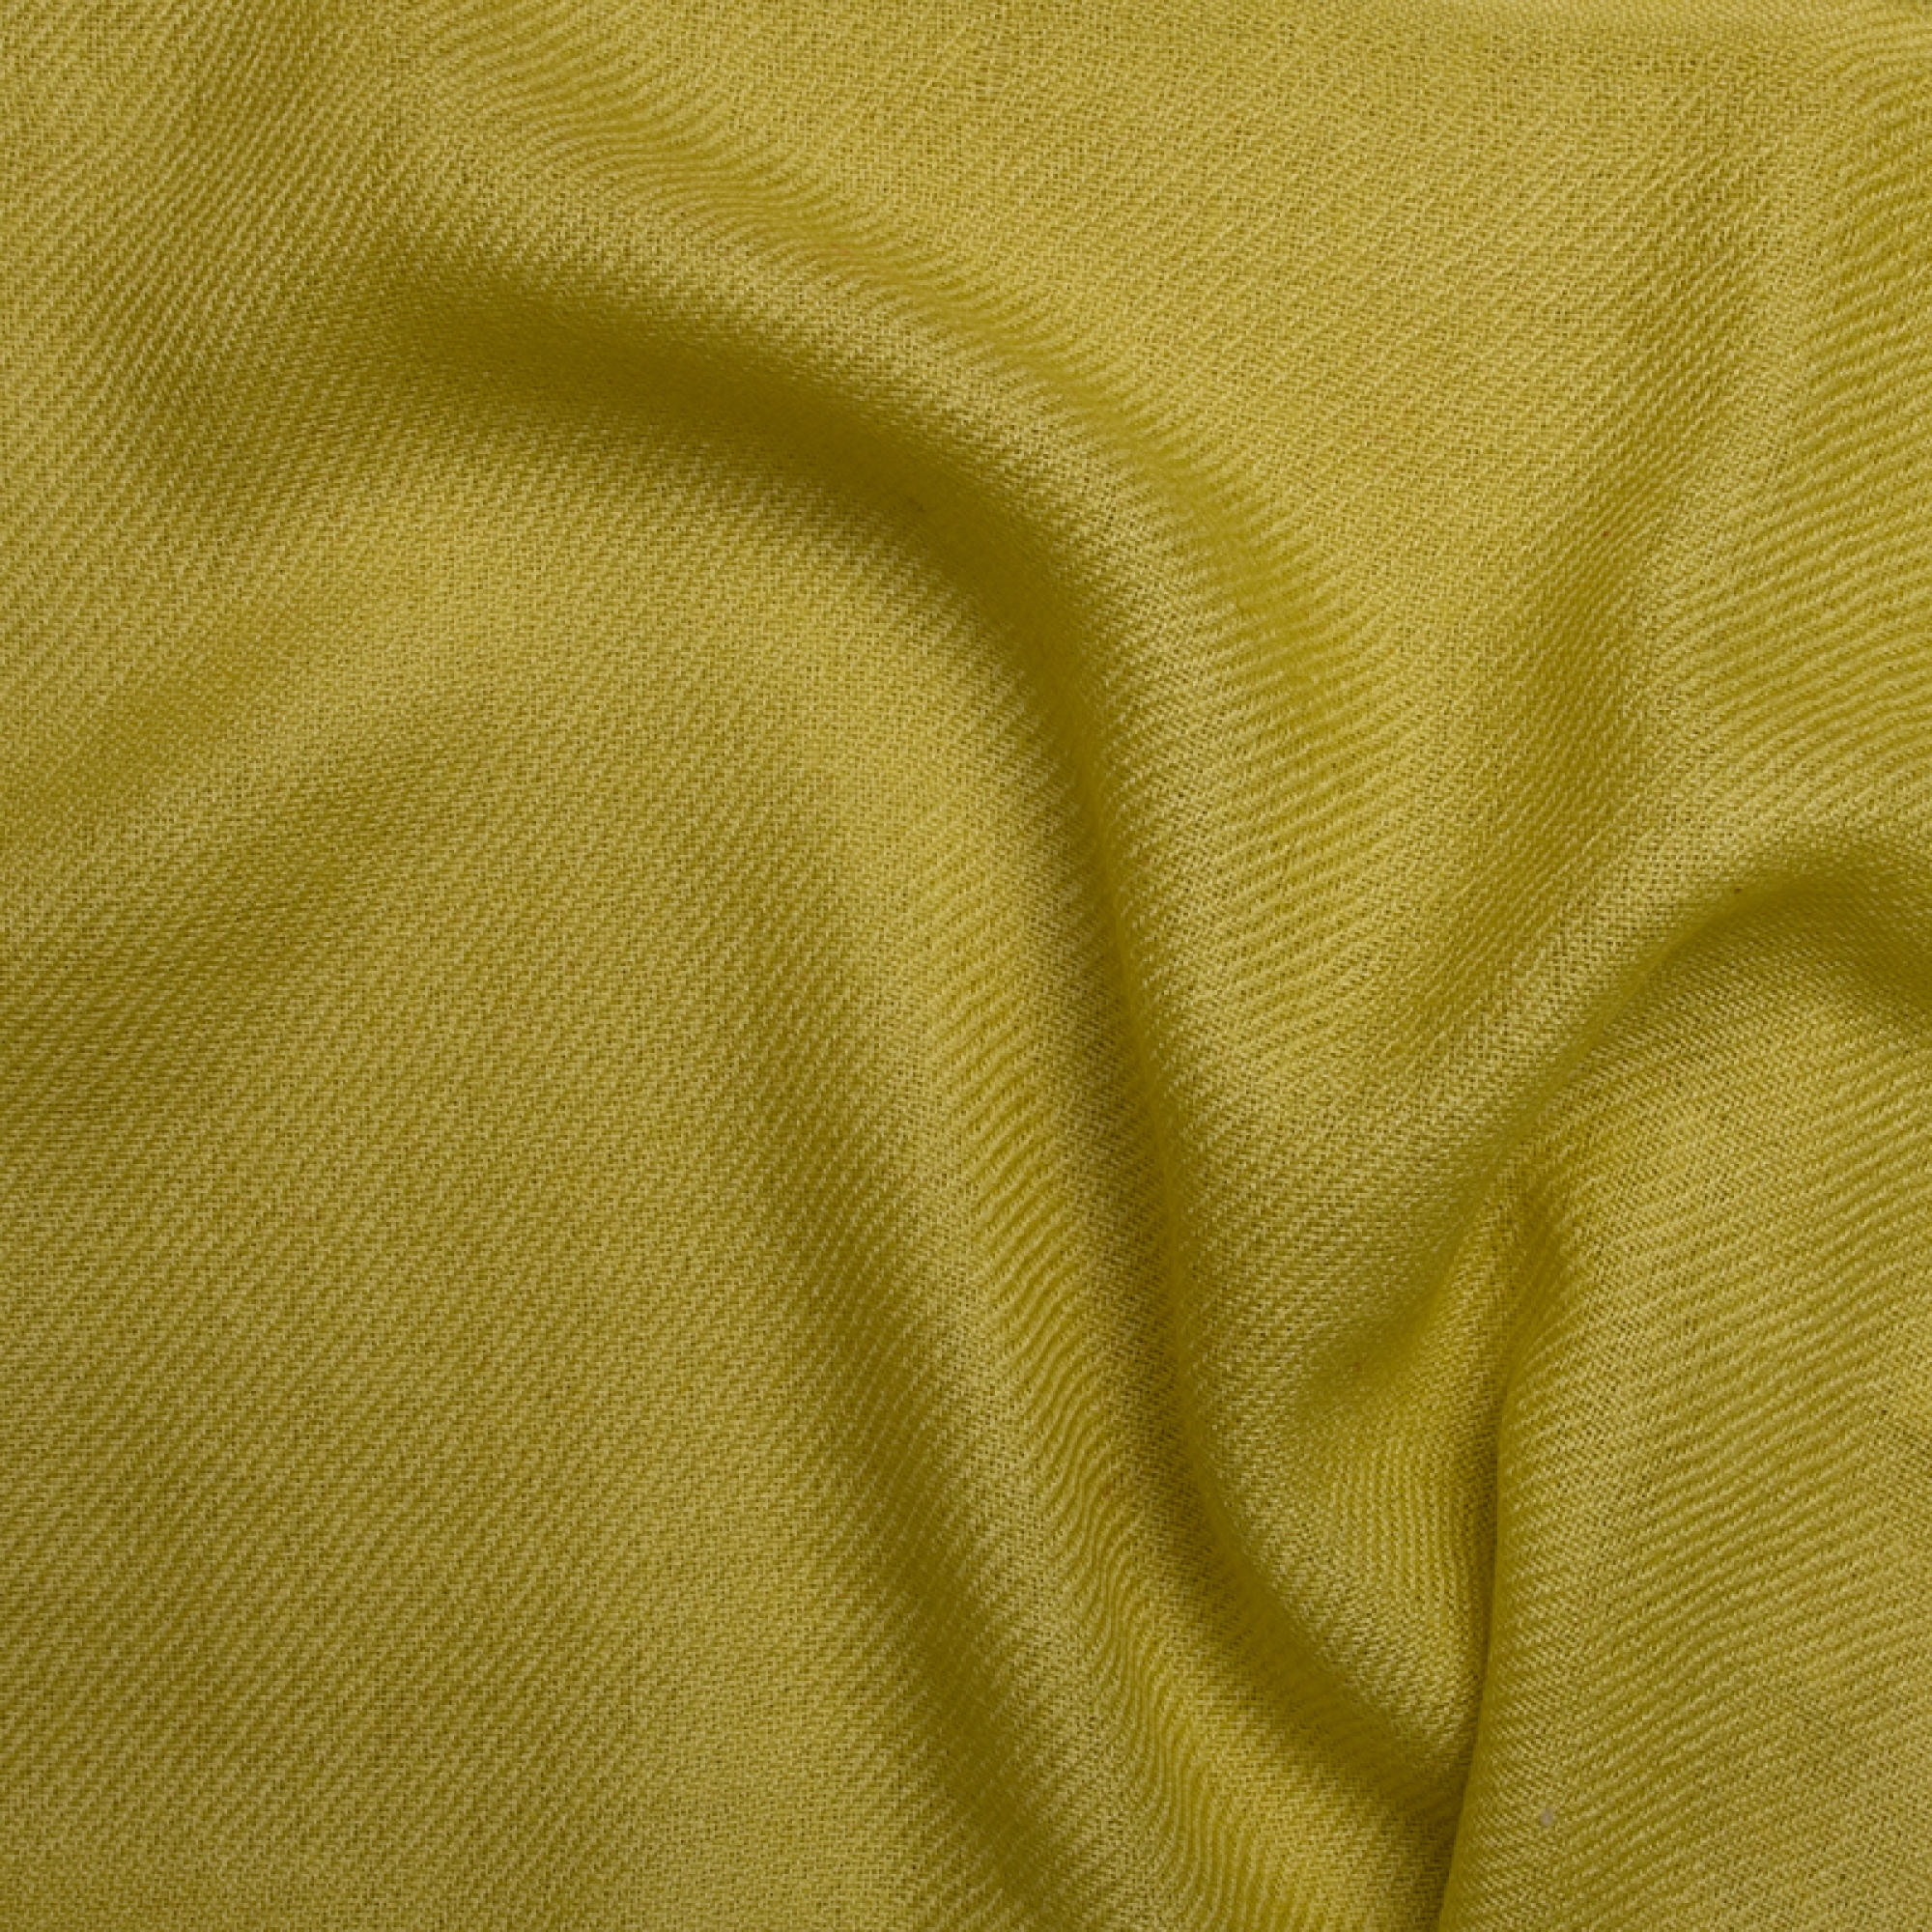 Cashmere accessories blanket toodoo plain l 220 x 220 sunny lime 220x220cm